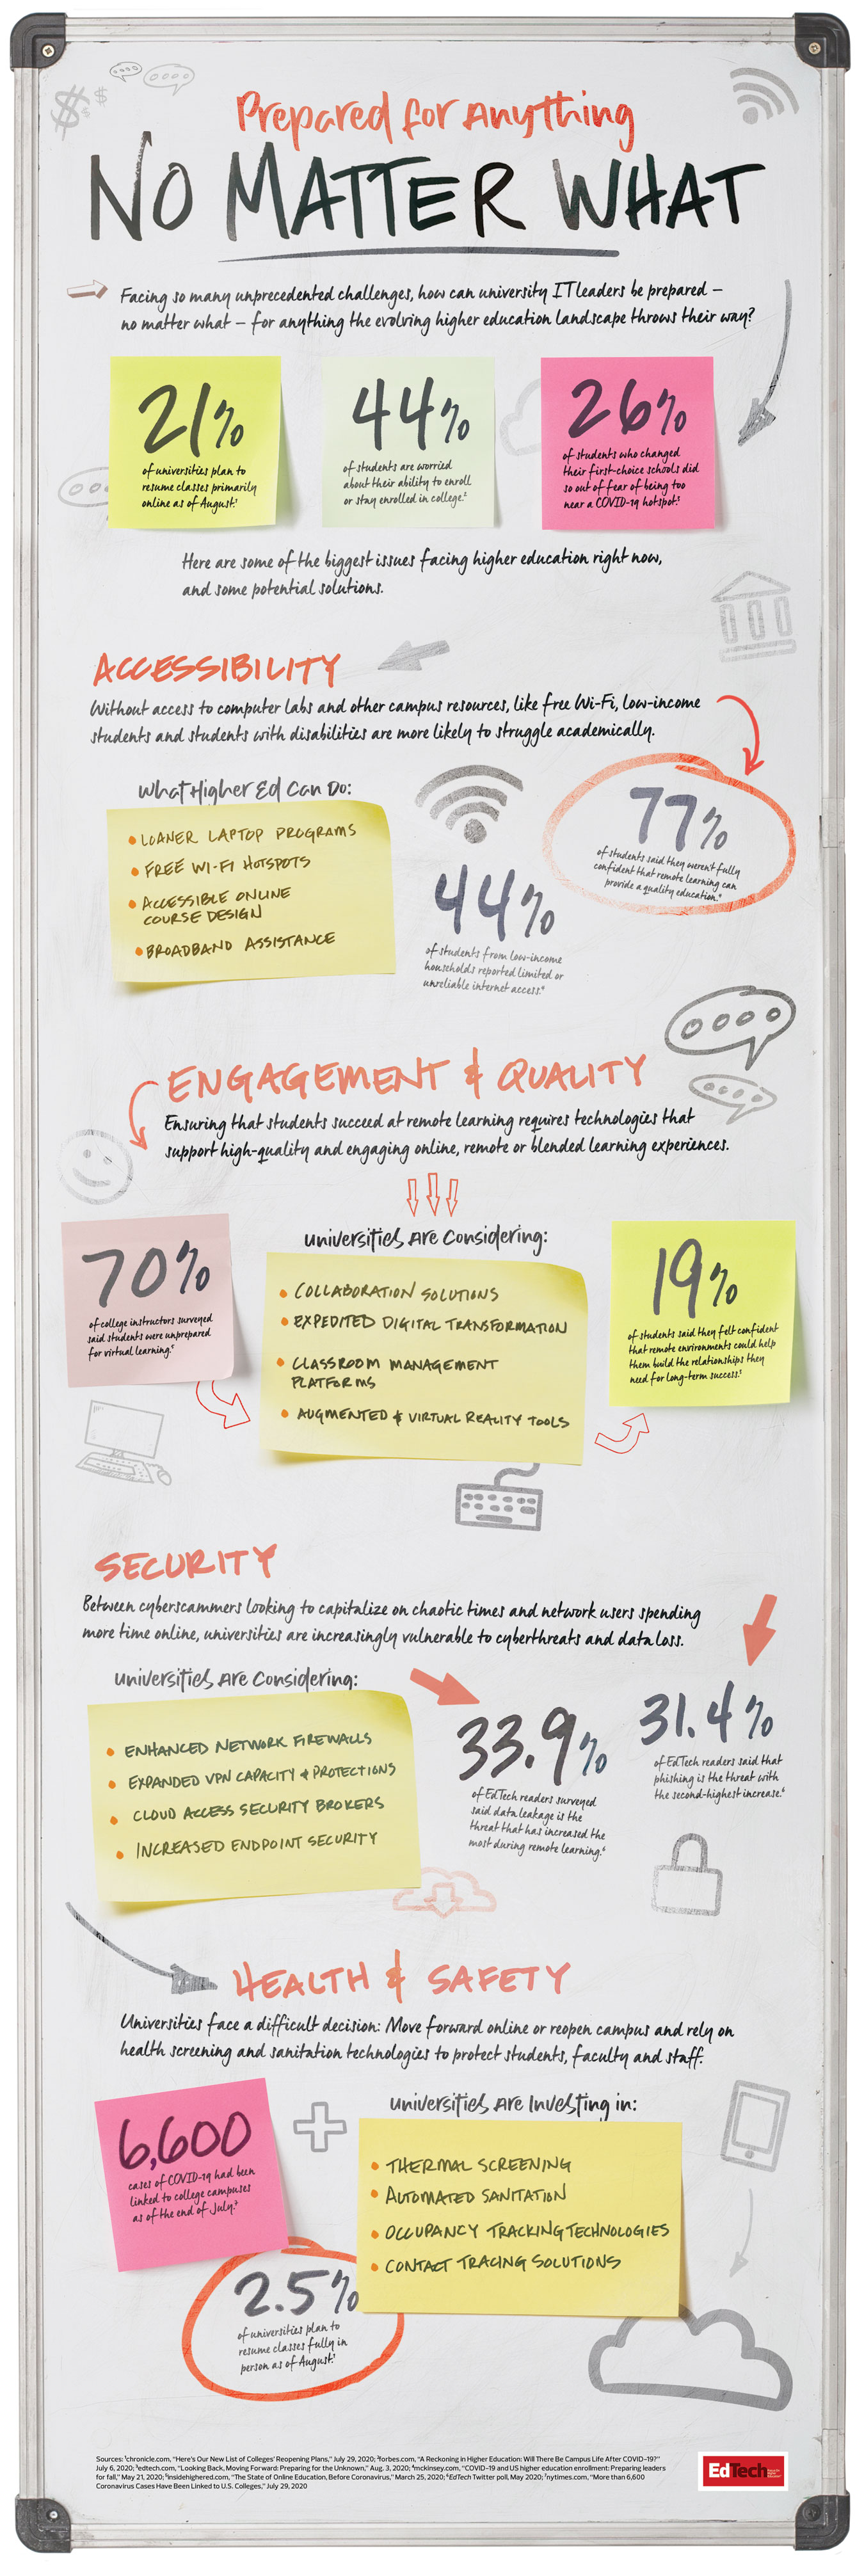 Back to Campus Infographic: What higher education IT leaders need to know about safety, accessibility, engagement and security to be prepared for this academic year.